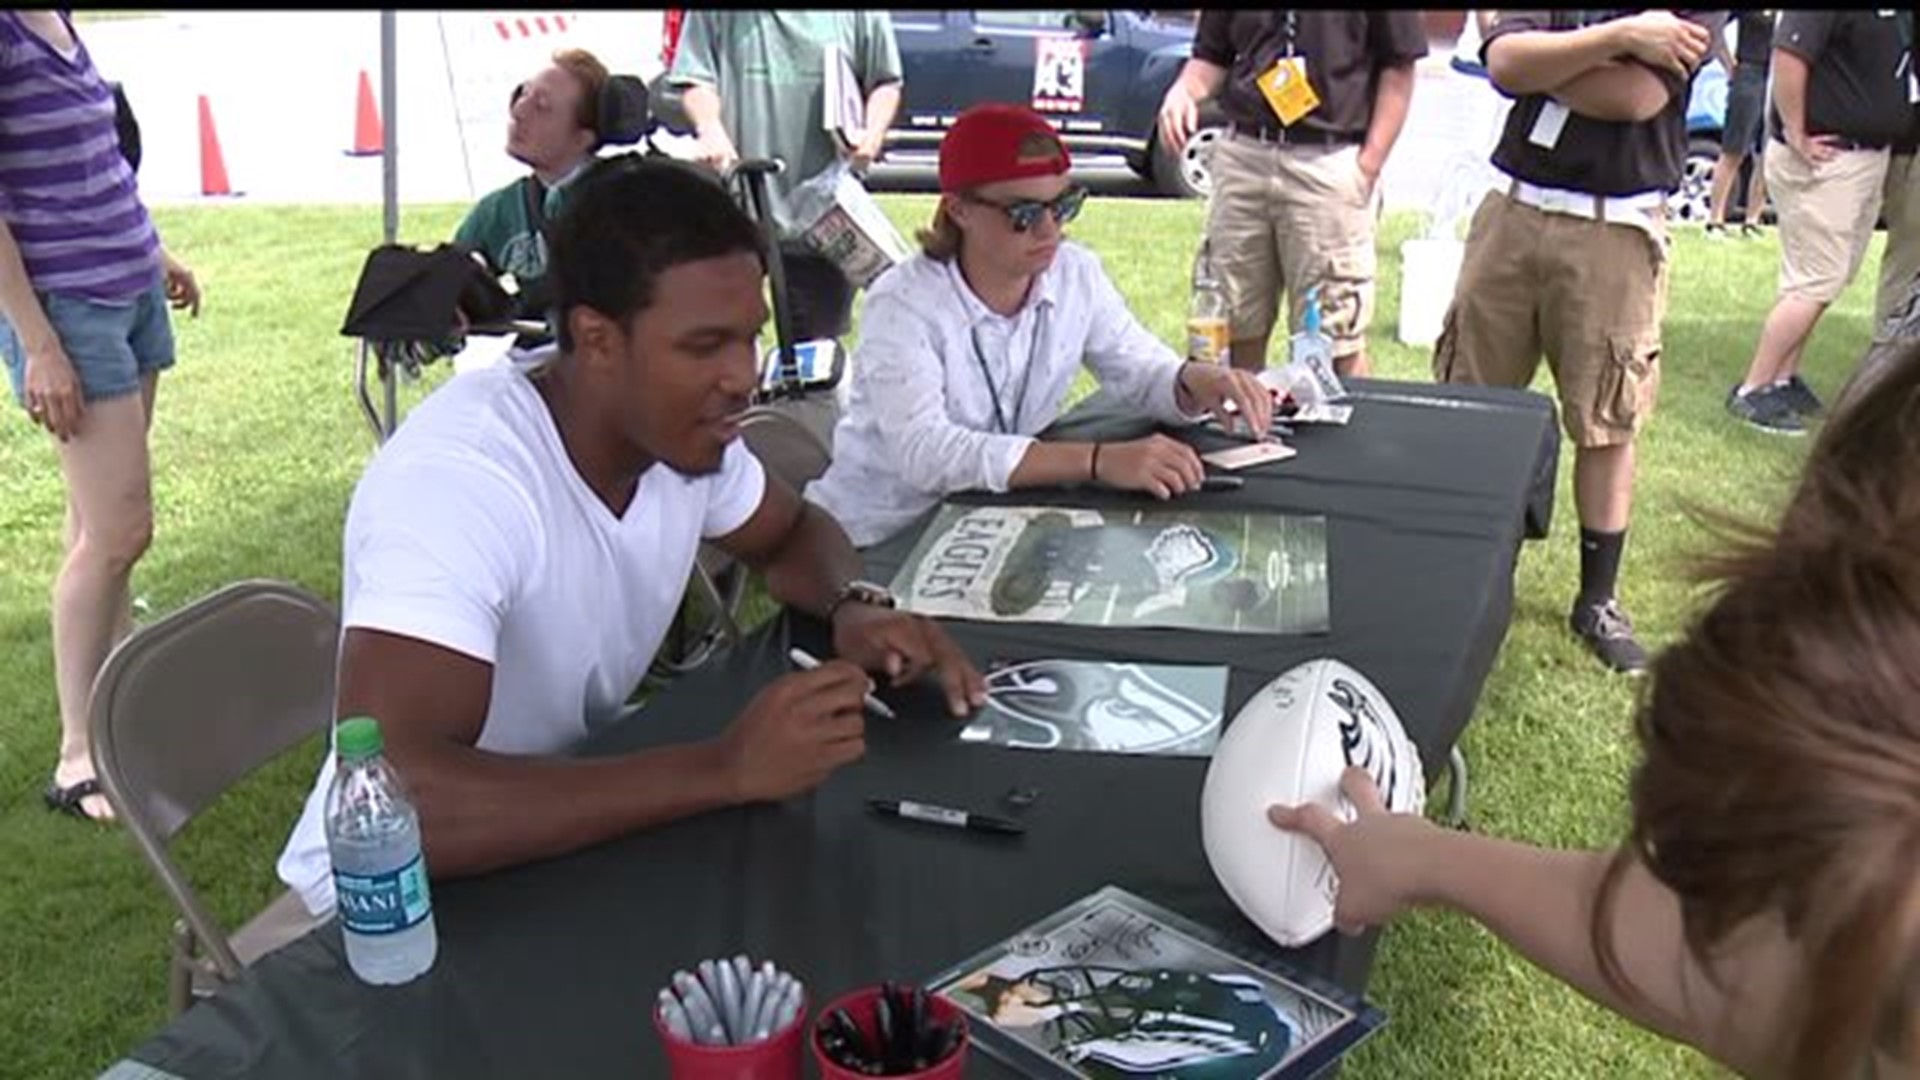 Eagles players meet and greet fans in Lancaster County